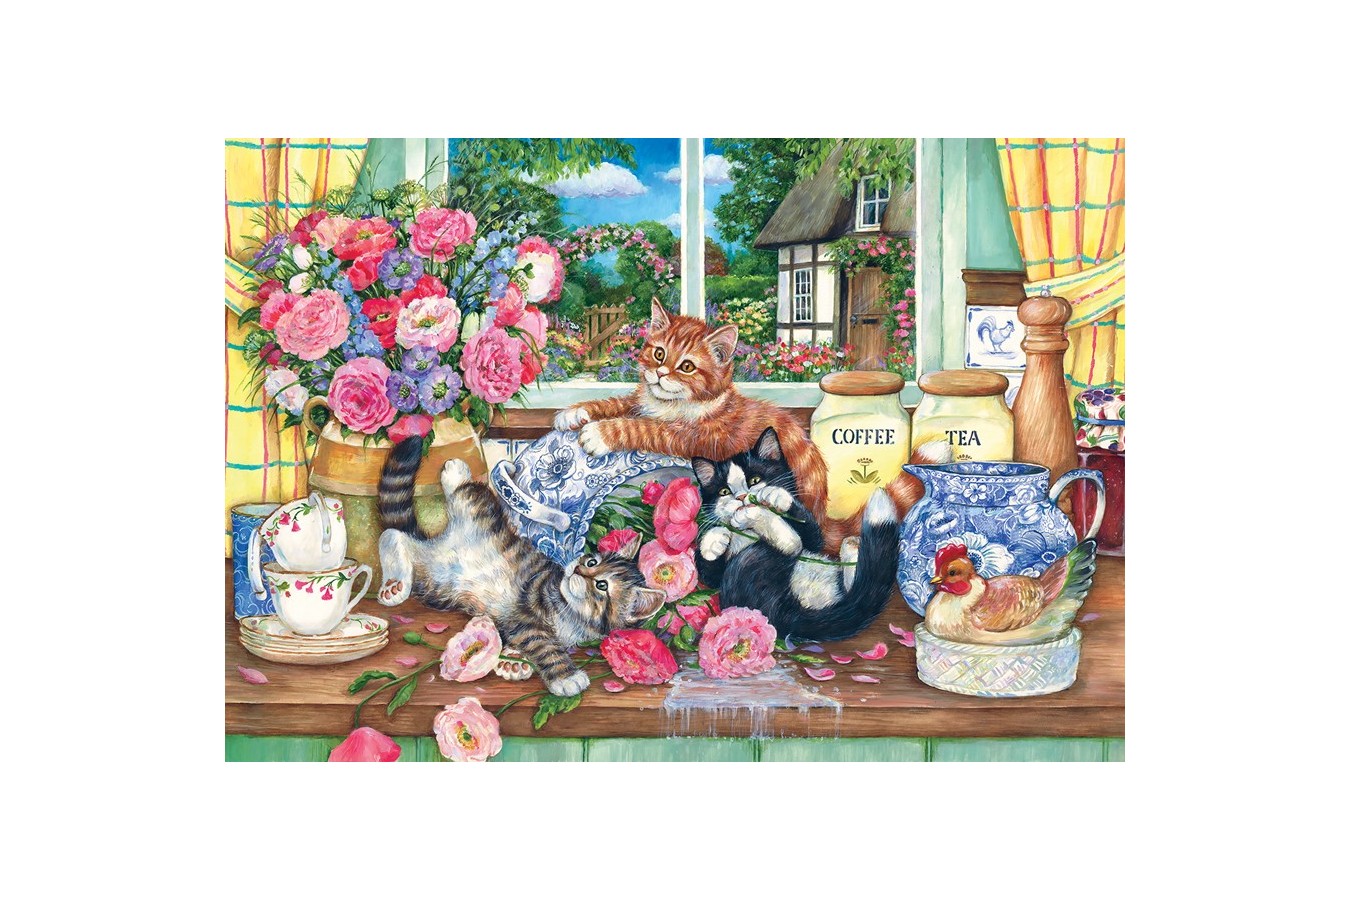 Puzzle Anatolian - Kittens in the Kitchen, 500 piese (3574)